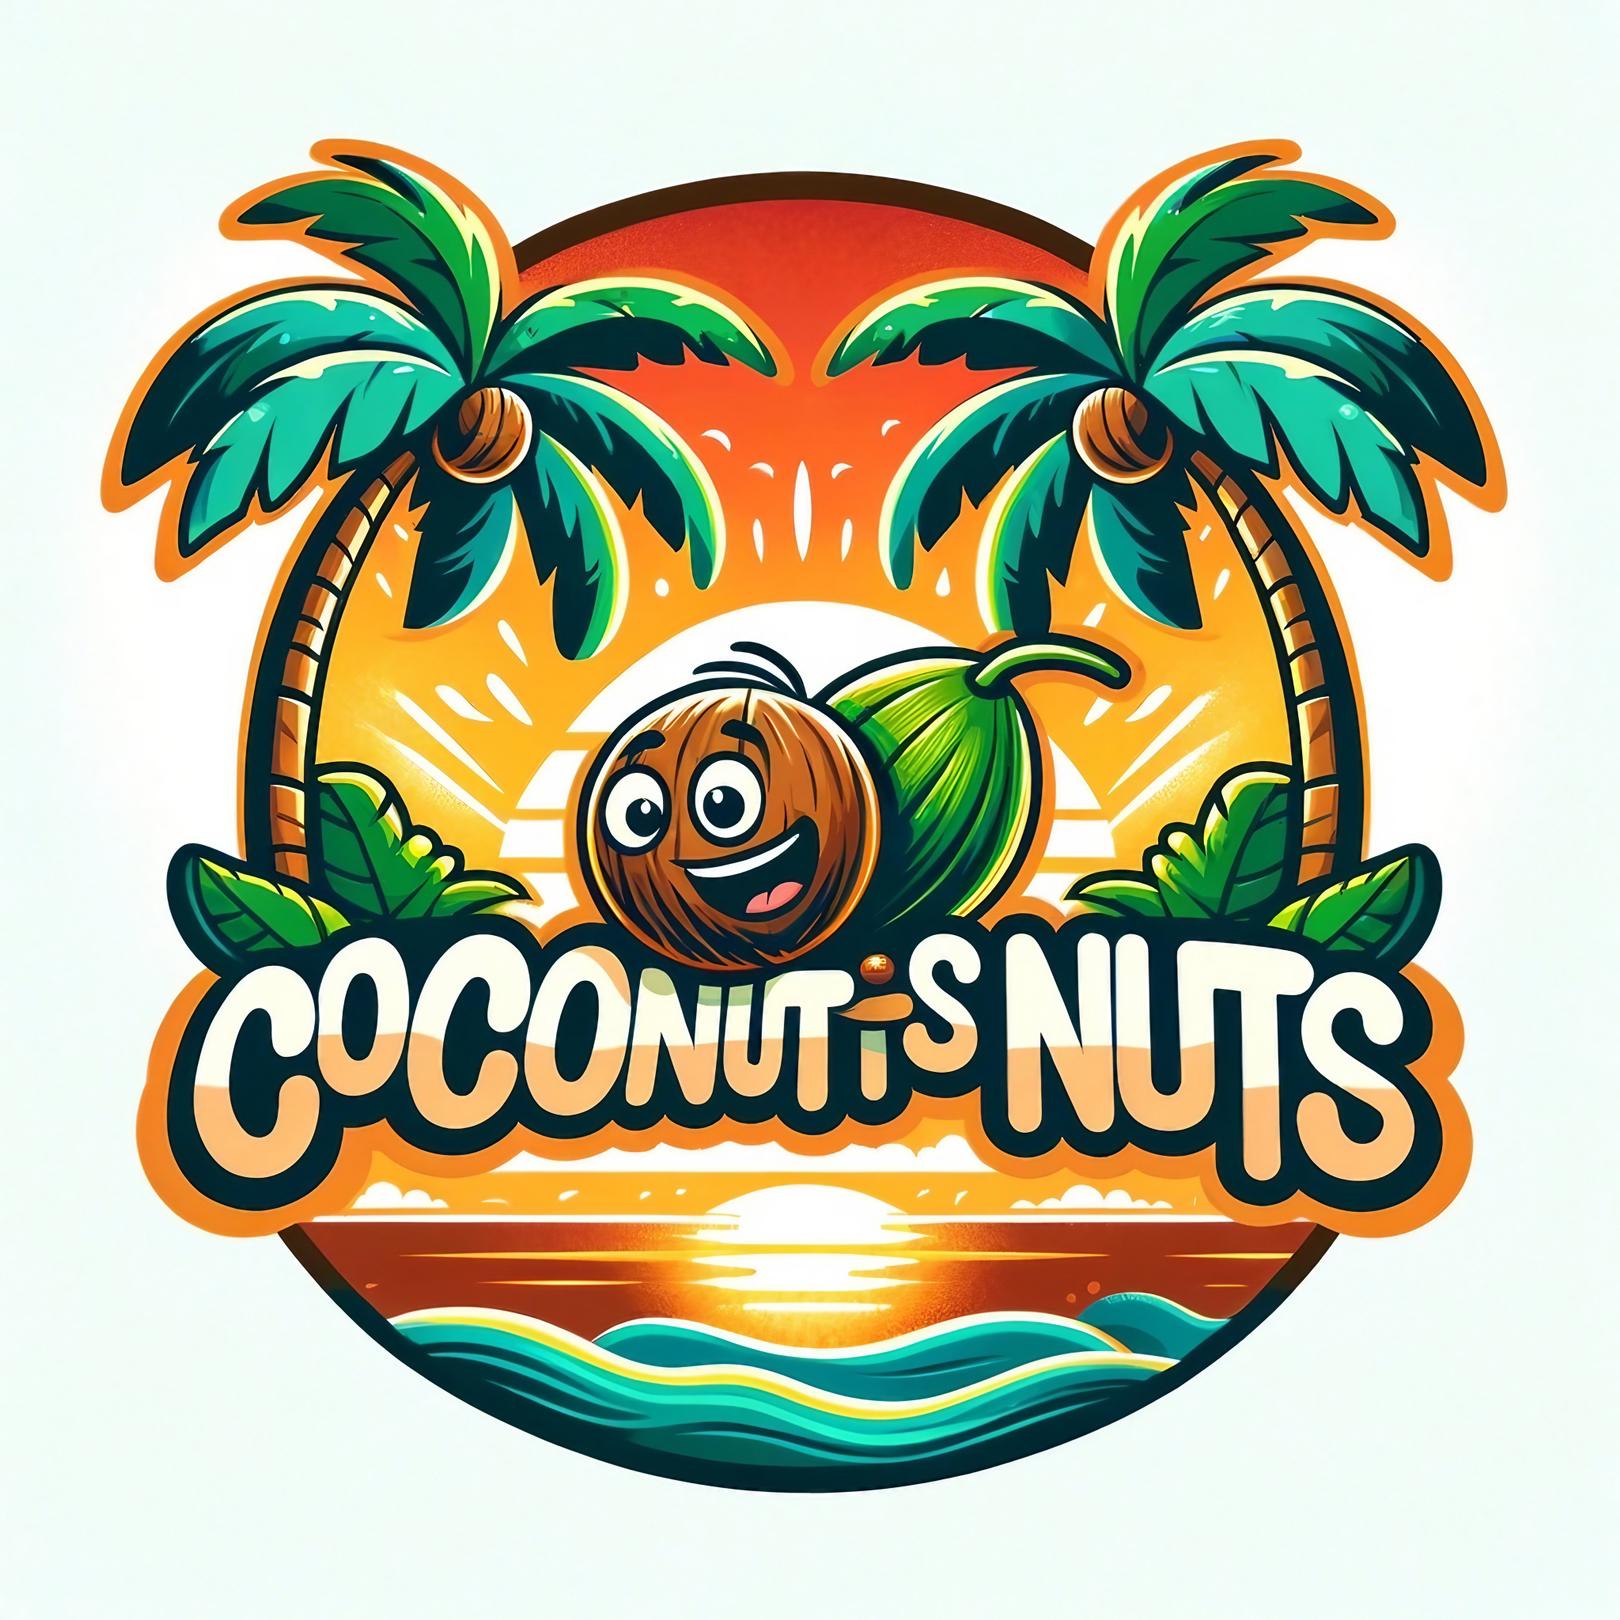 Coconuts Nuts's images